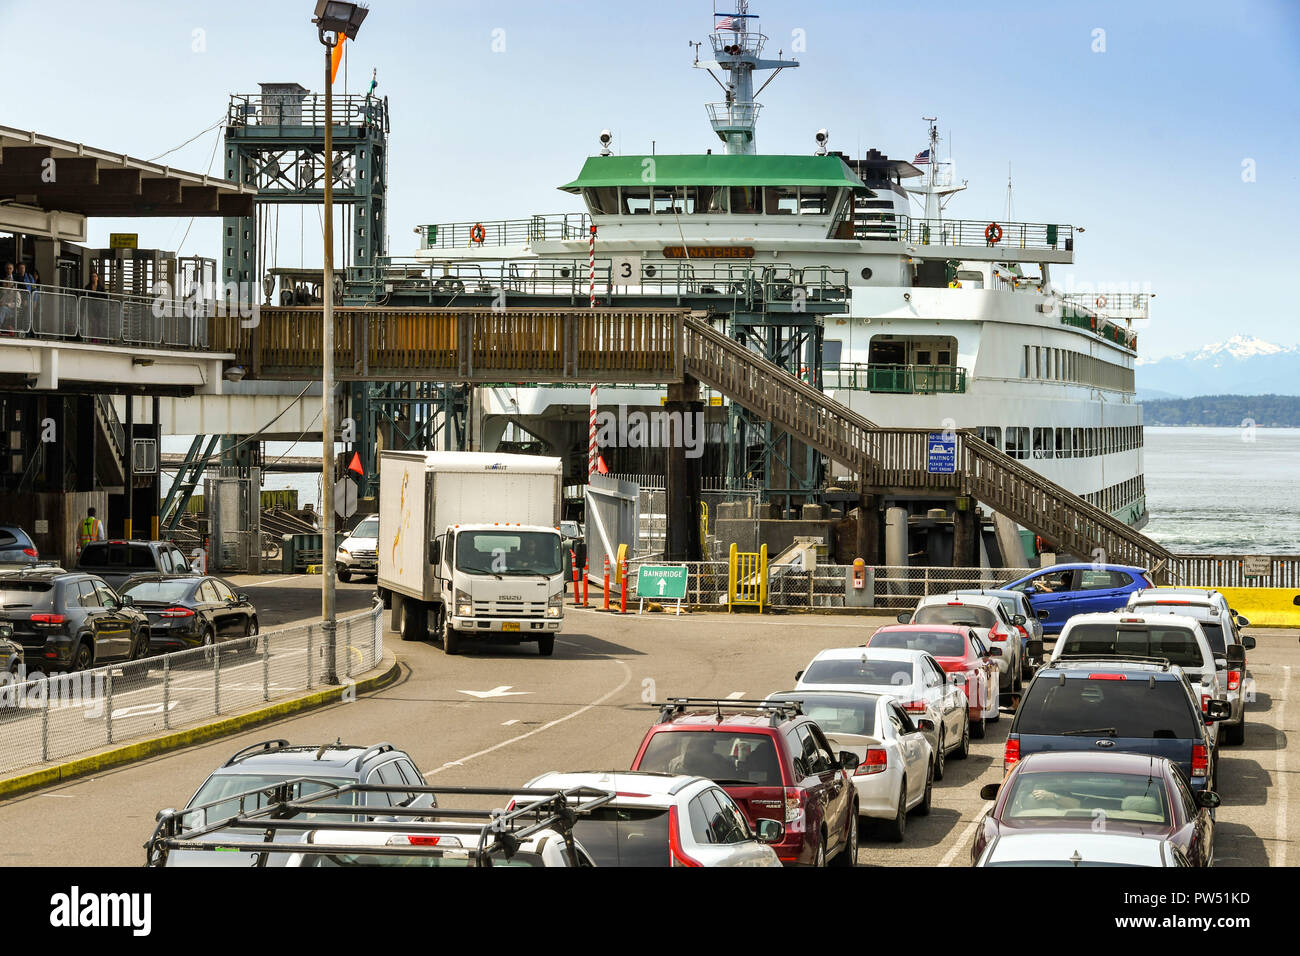 SEATTLE, WASHINGTON STATE, USA - JUNE 2018: Rows of cars waiting on the harborside in Seattle to drive on to a large ferry while other vehicles drive  Stock Photo